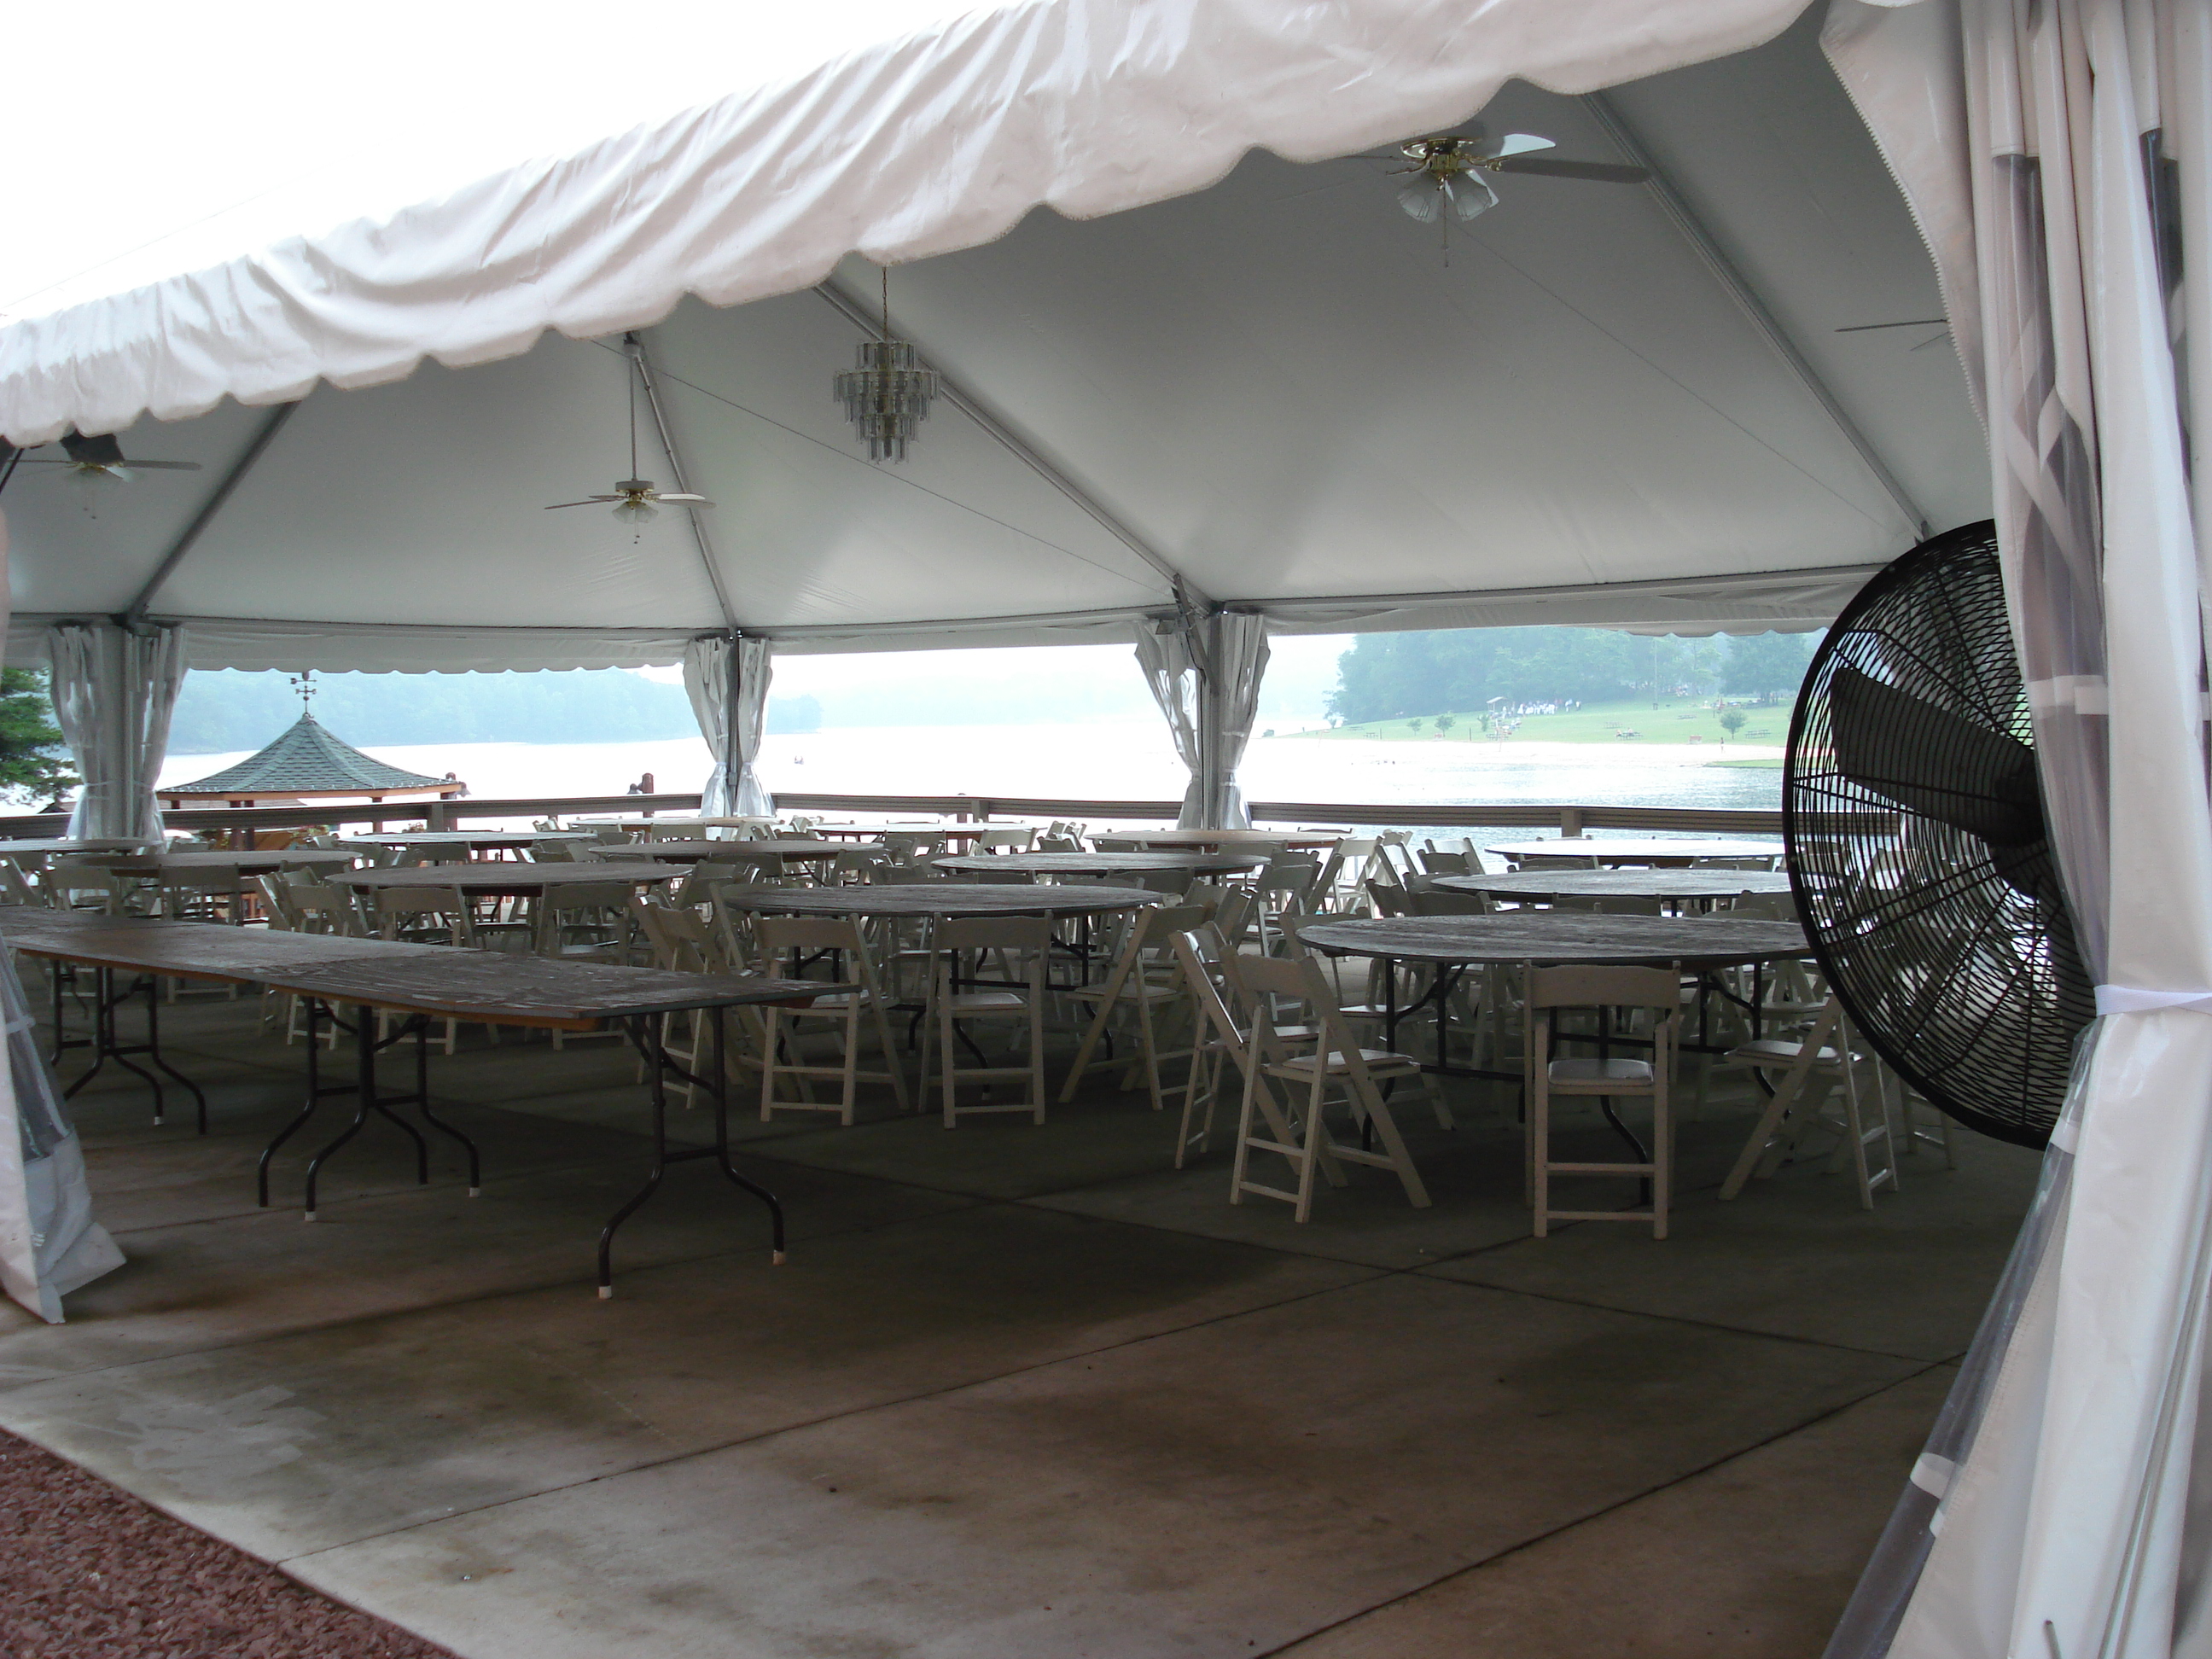 outdoor tented area setting up for an event